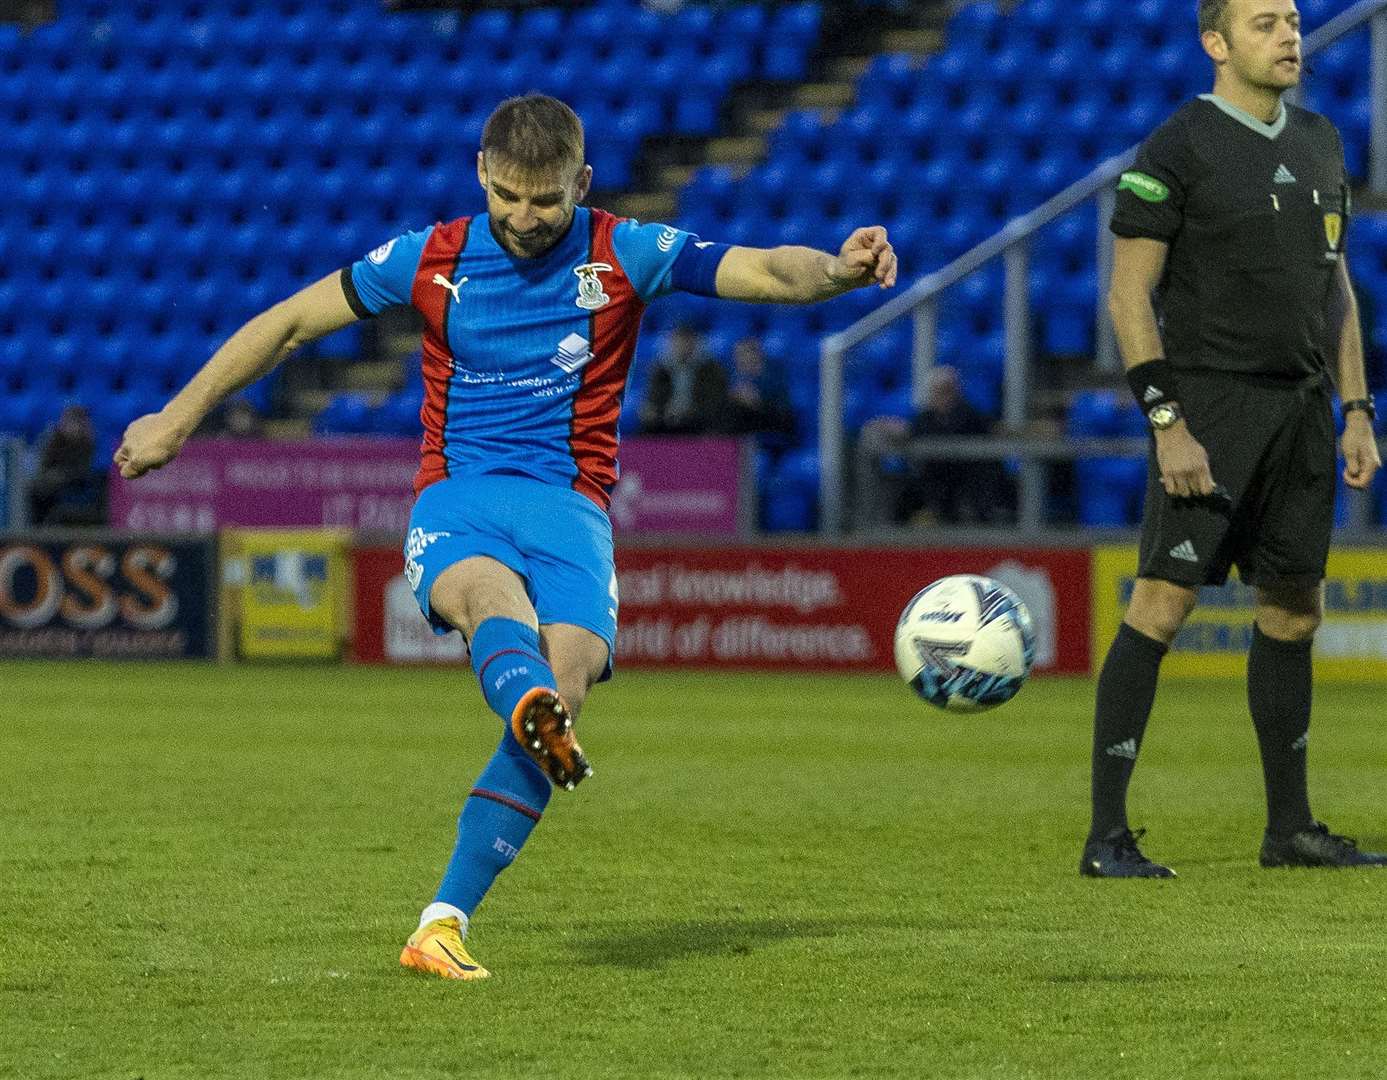 Sean Welsh played almost the full game against Cowdenbeath – his first start since mid-July. Picture: Ken Macpherson